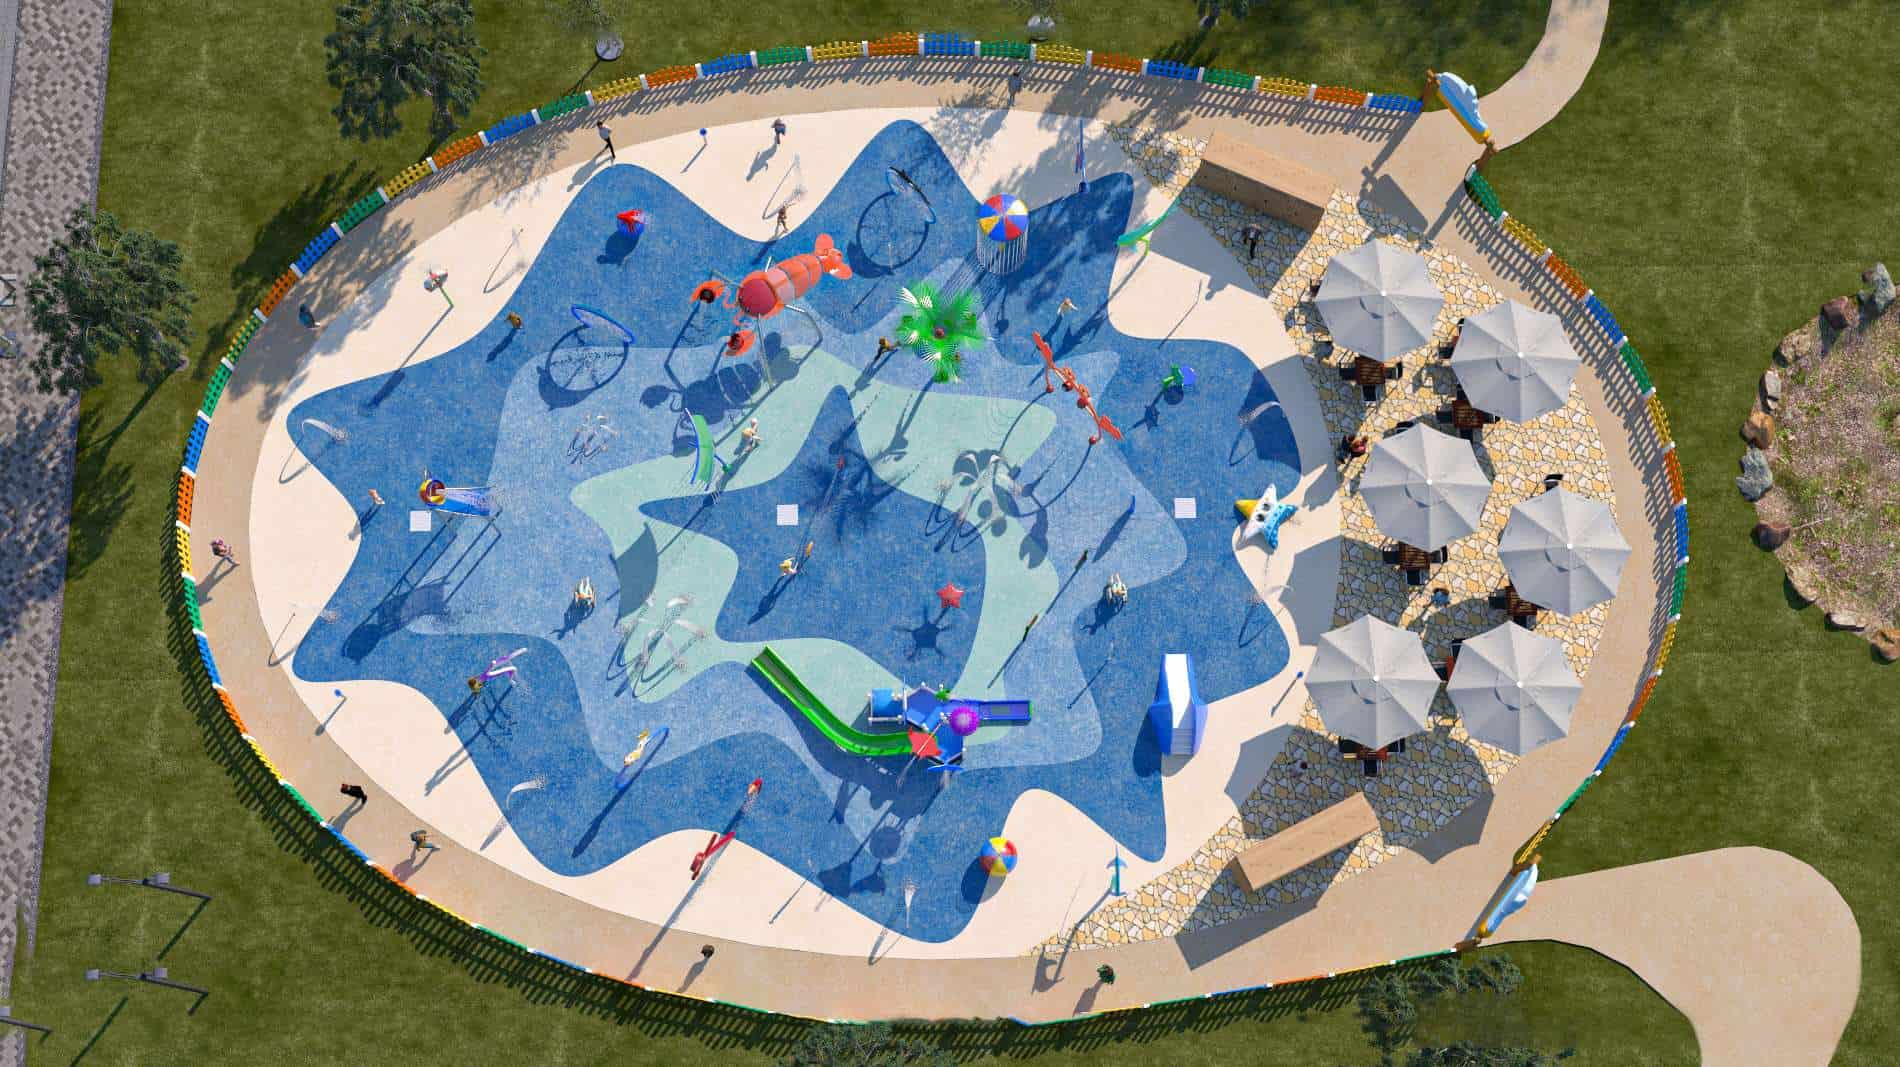 How To Build A Splash Pad